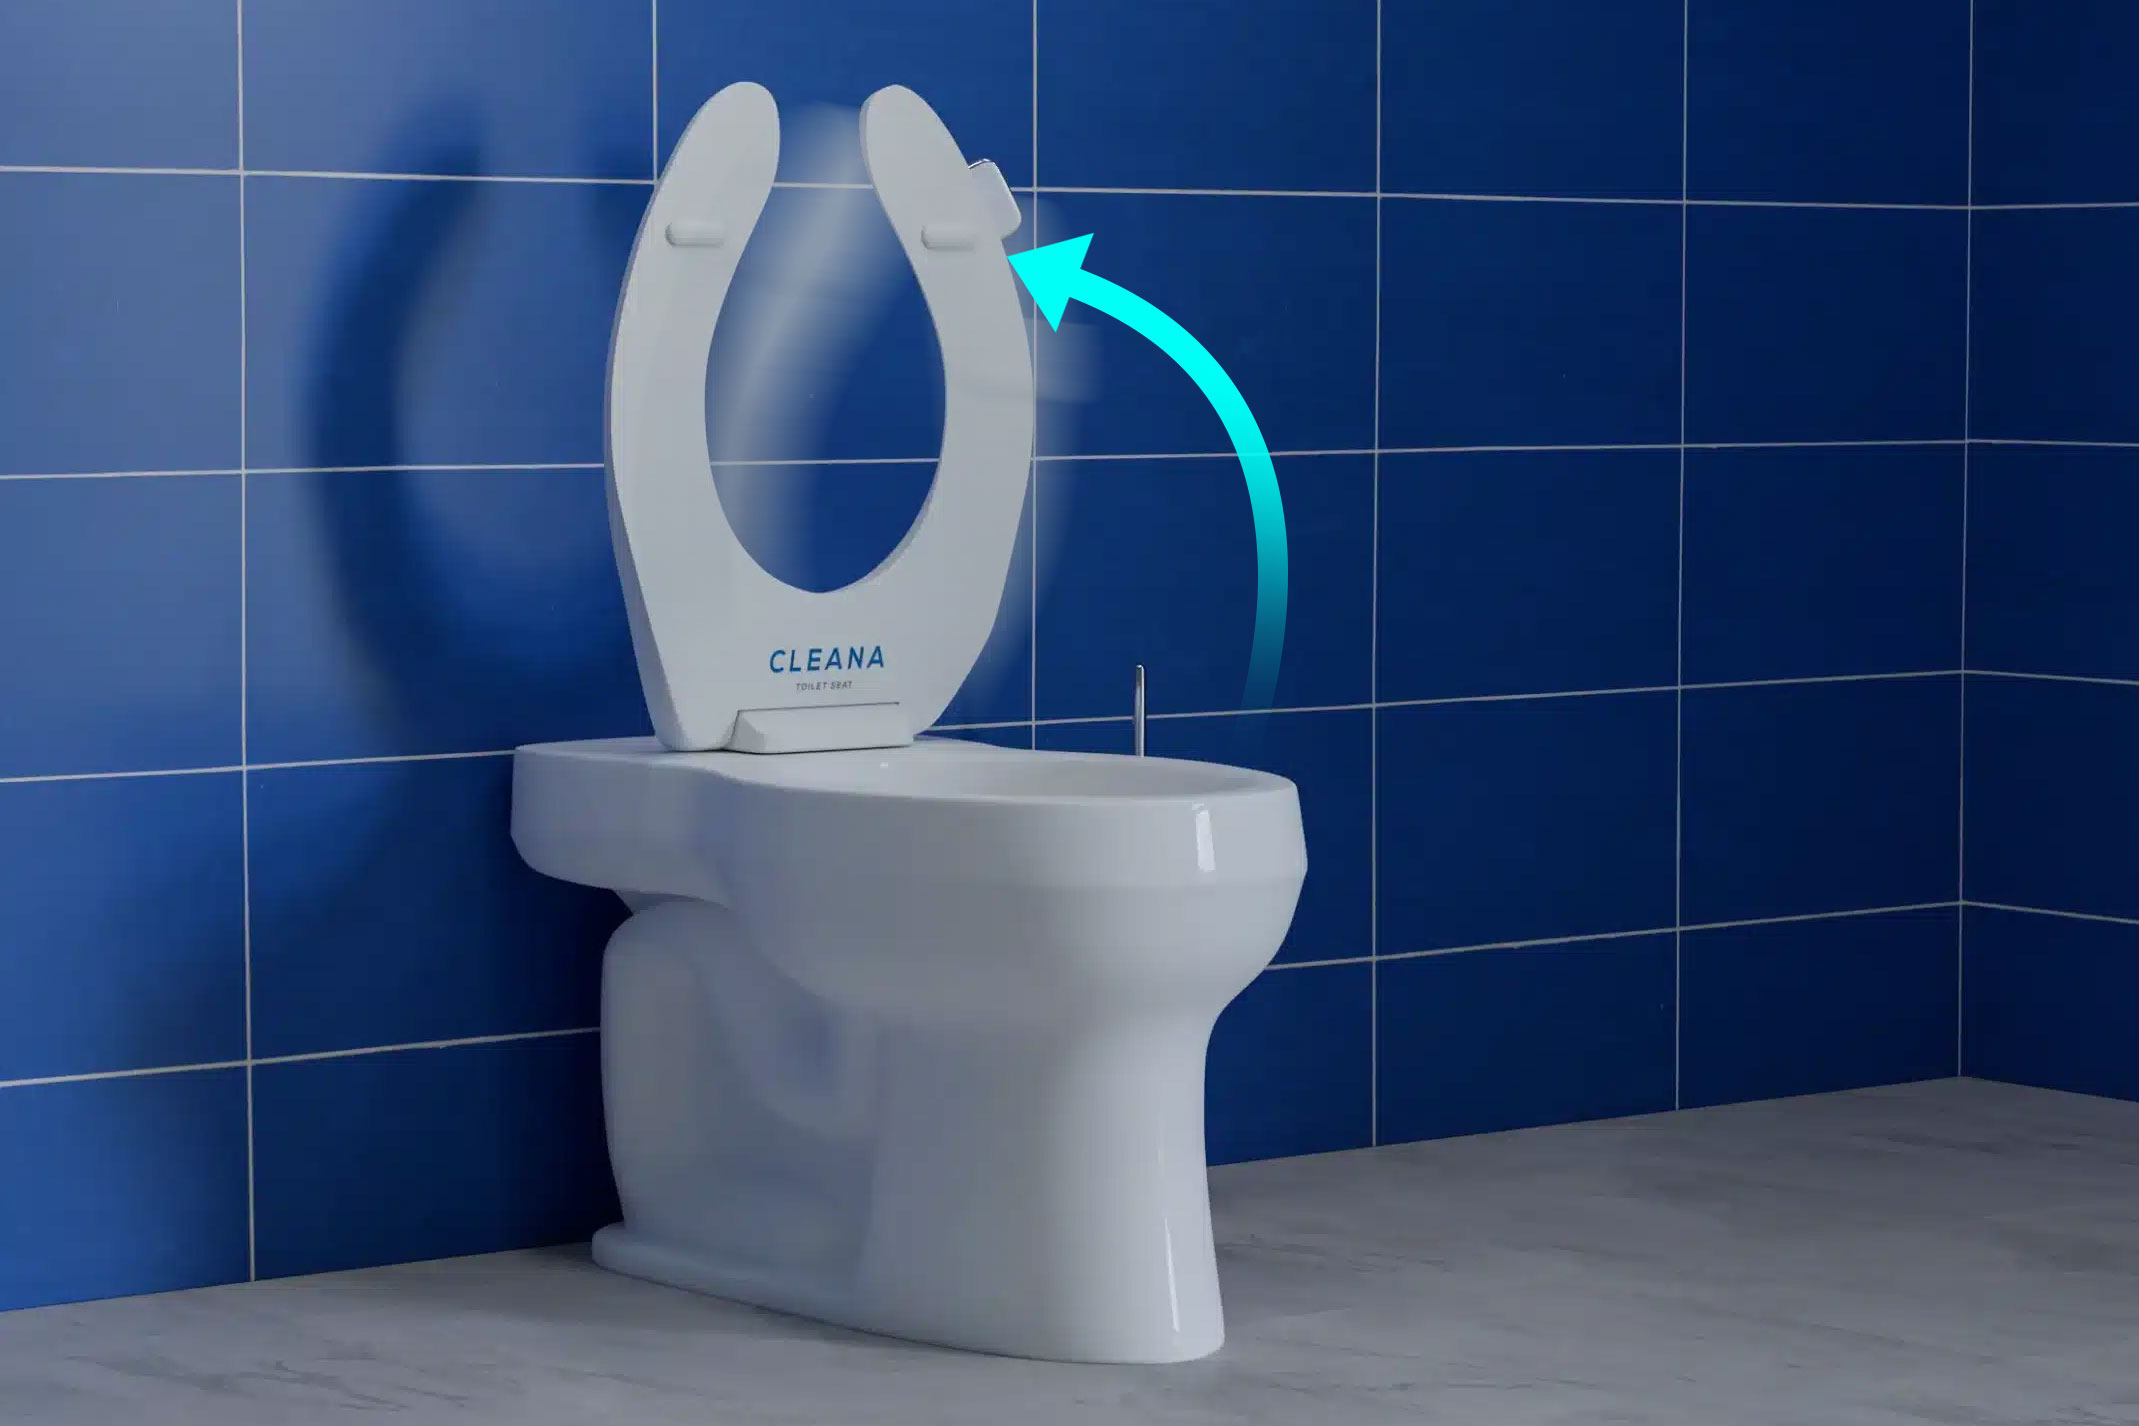 Startup aims to flush away the problem of icky toilet seats